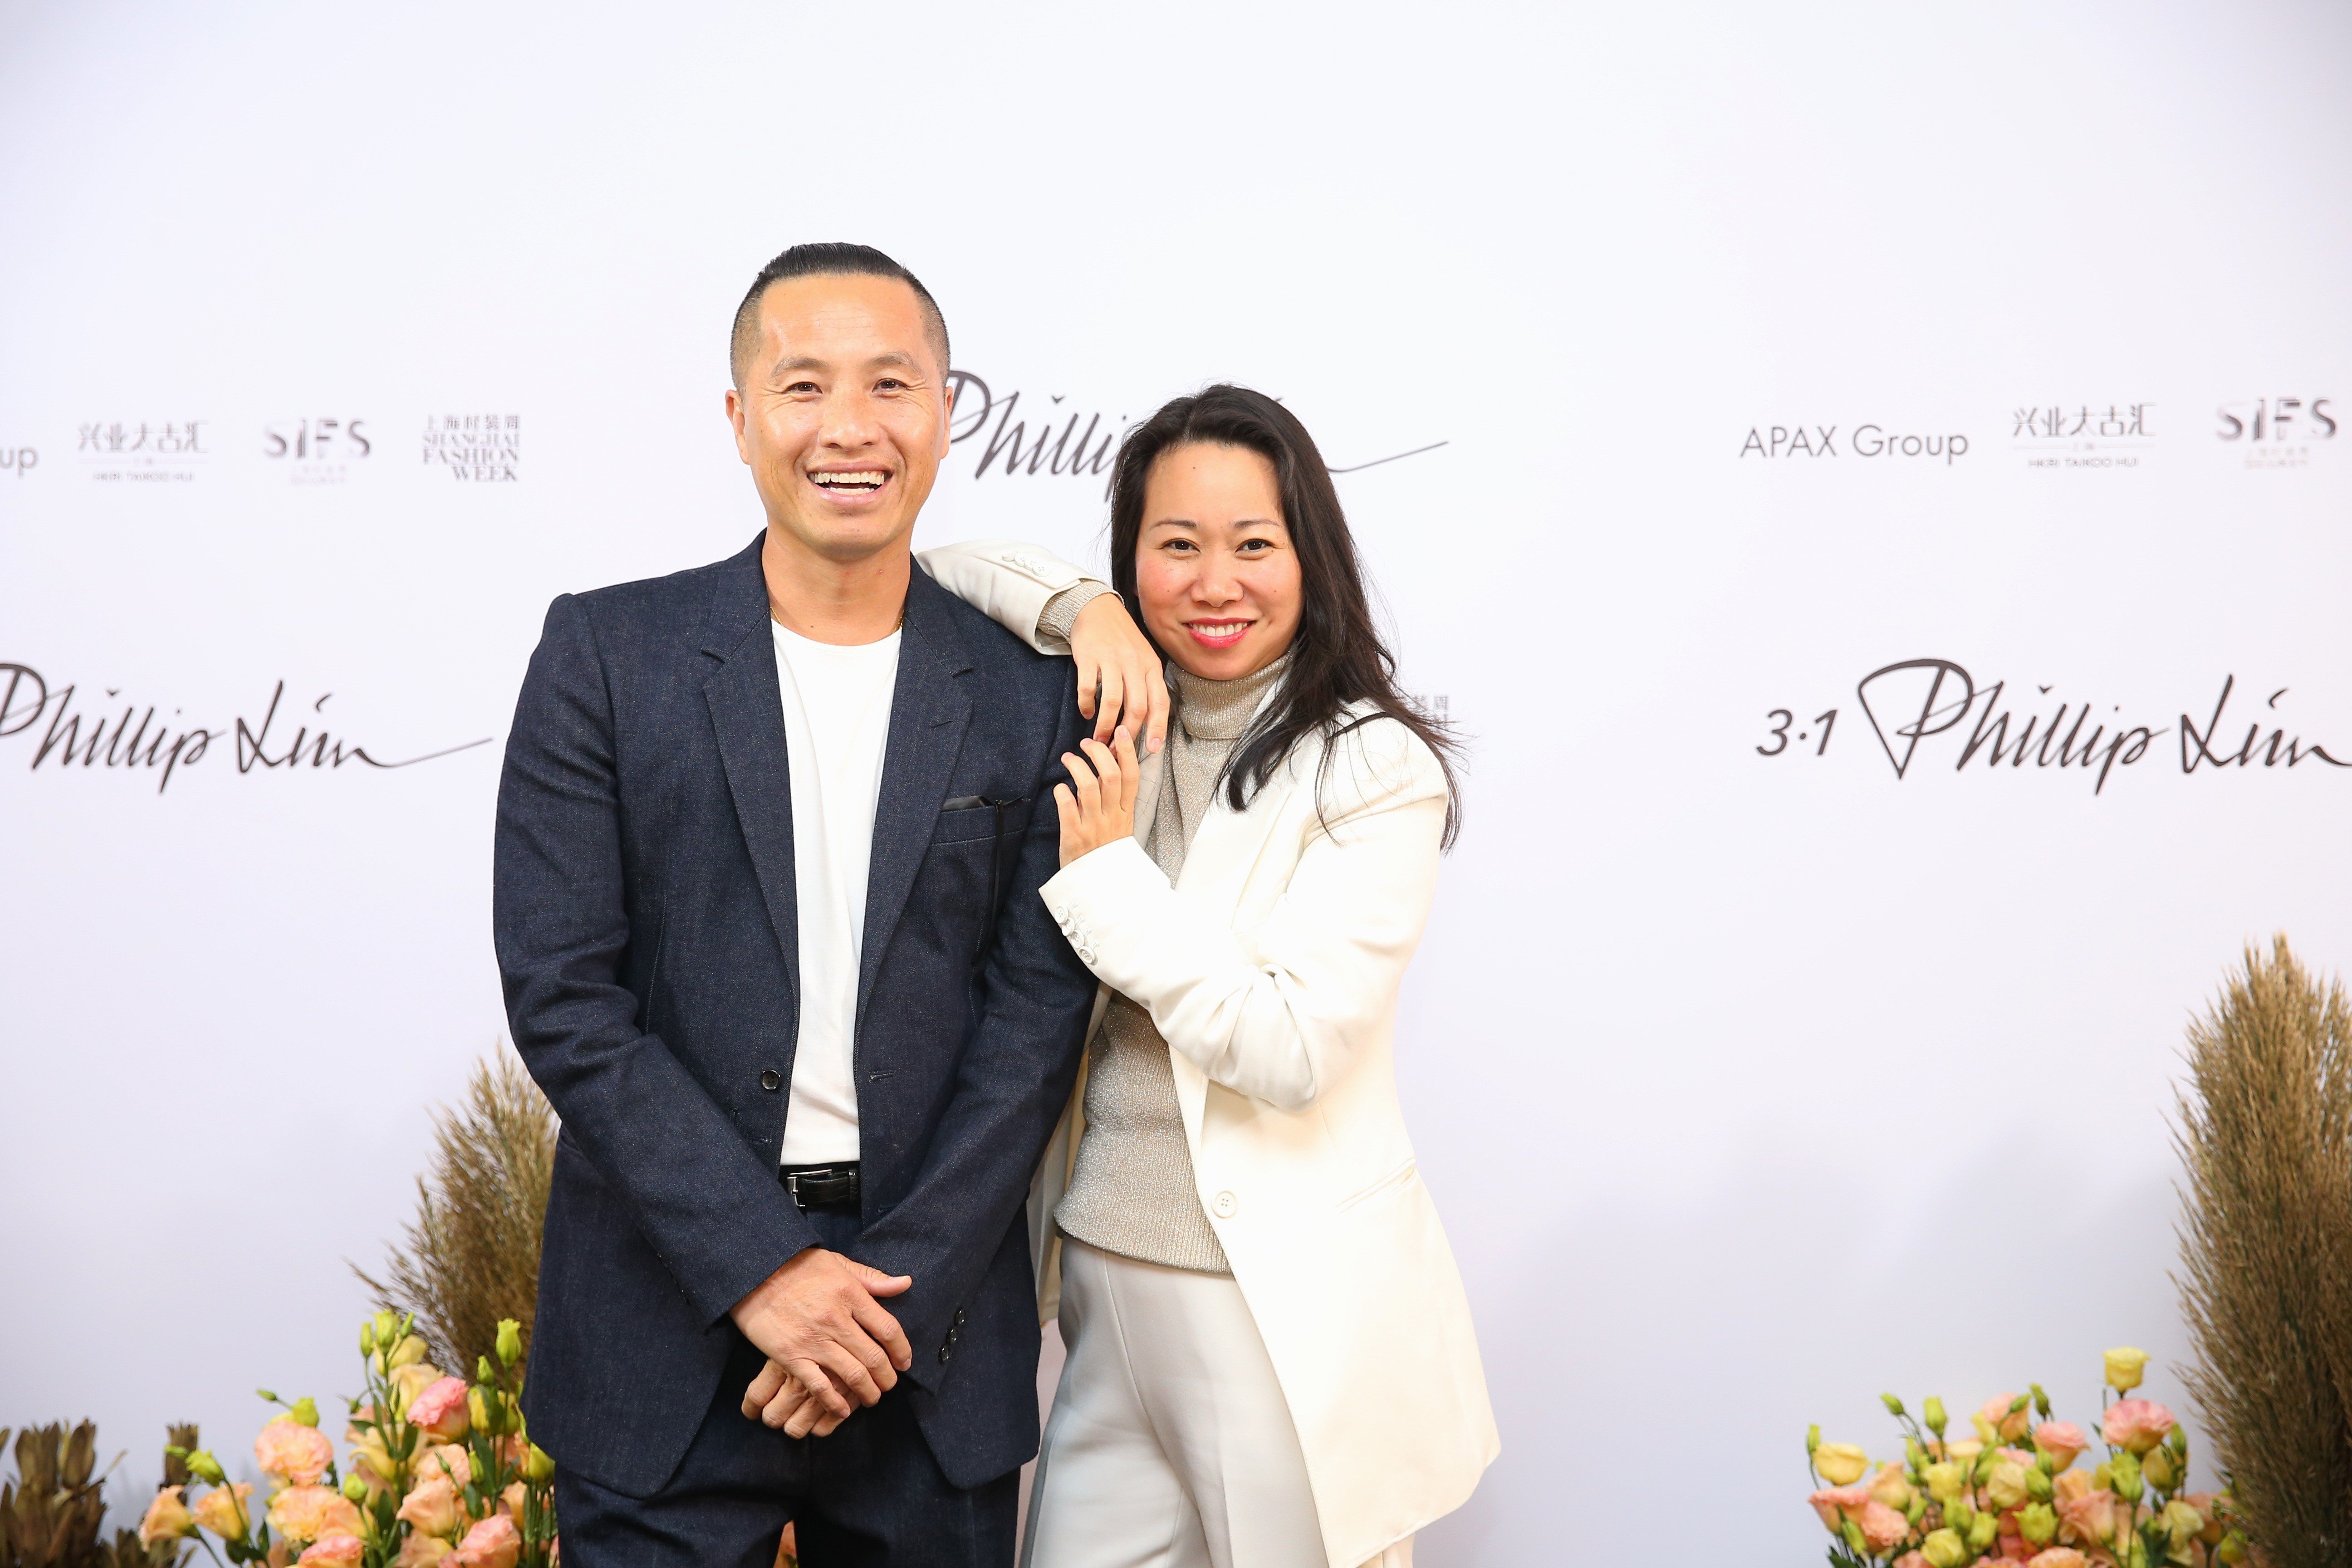 Phillip Lim talks about 'Made in China' stigma and being Chinese